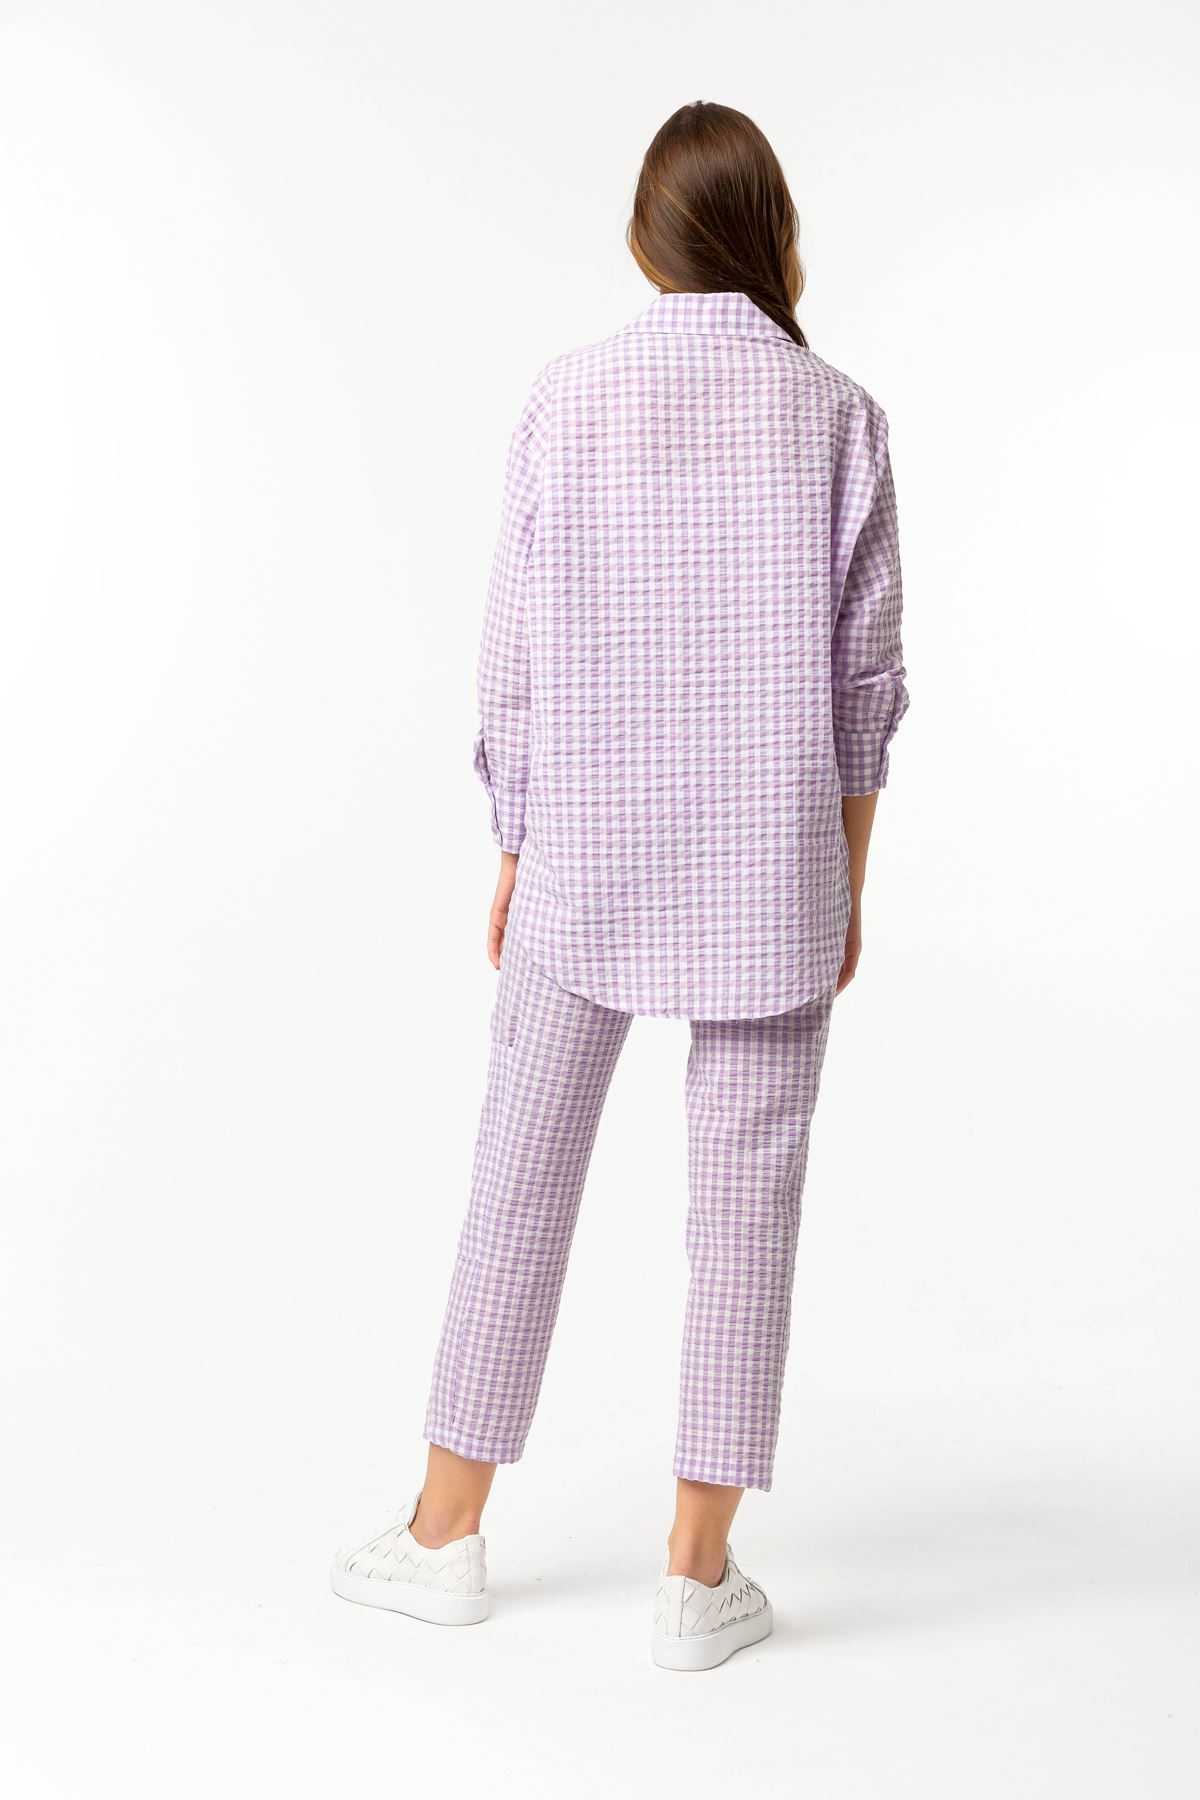 Plaid Fabric Long Sleeve Oversize Checkerboard Print Square Pattern Women'S Shirt - Lilac